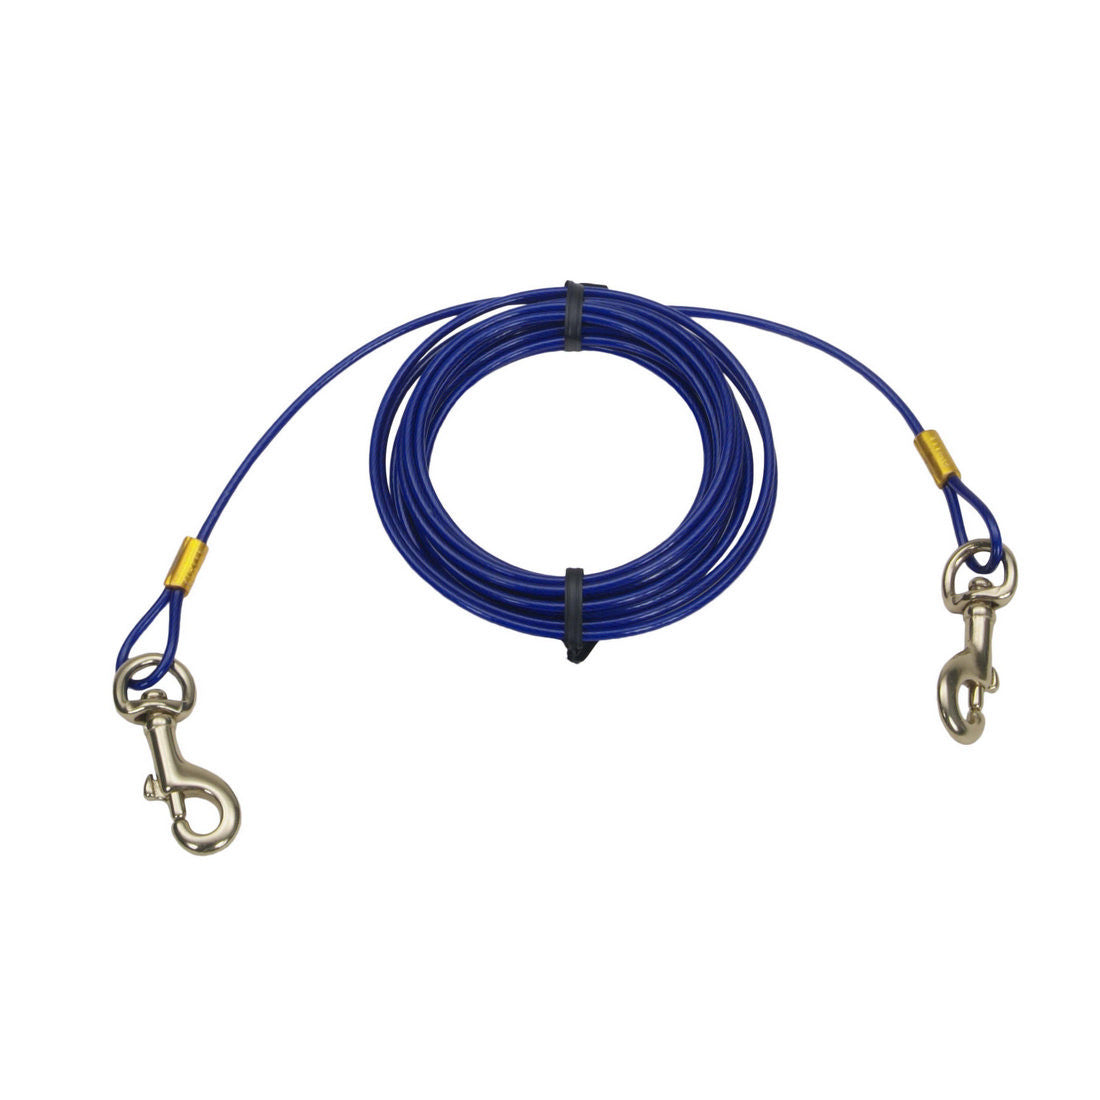 Coastal 10' Medium Tie Out Cable Up to 50 lbs. {L+b}769076 076484890505